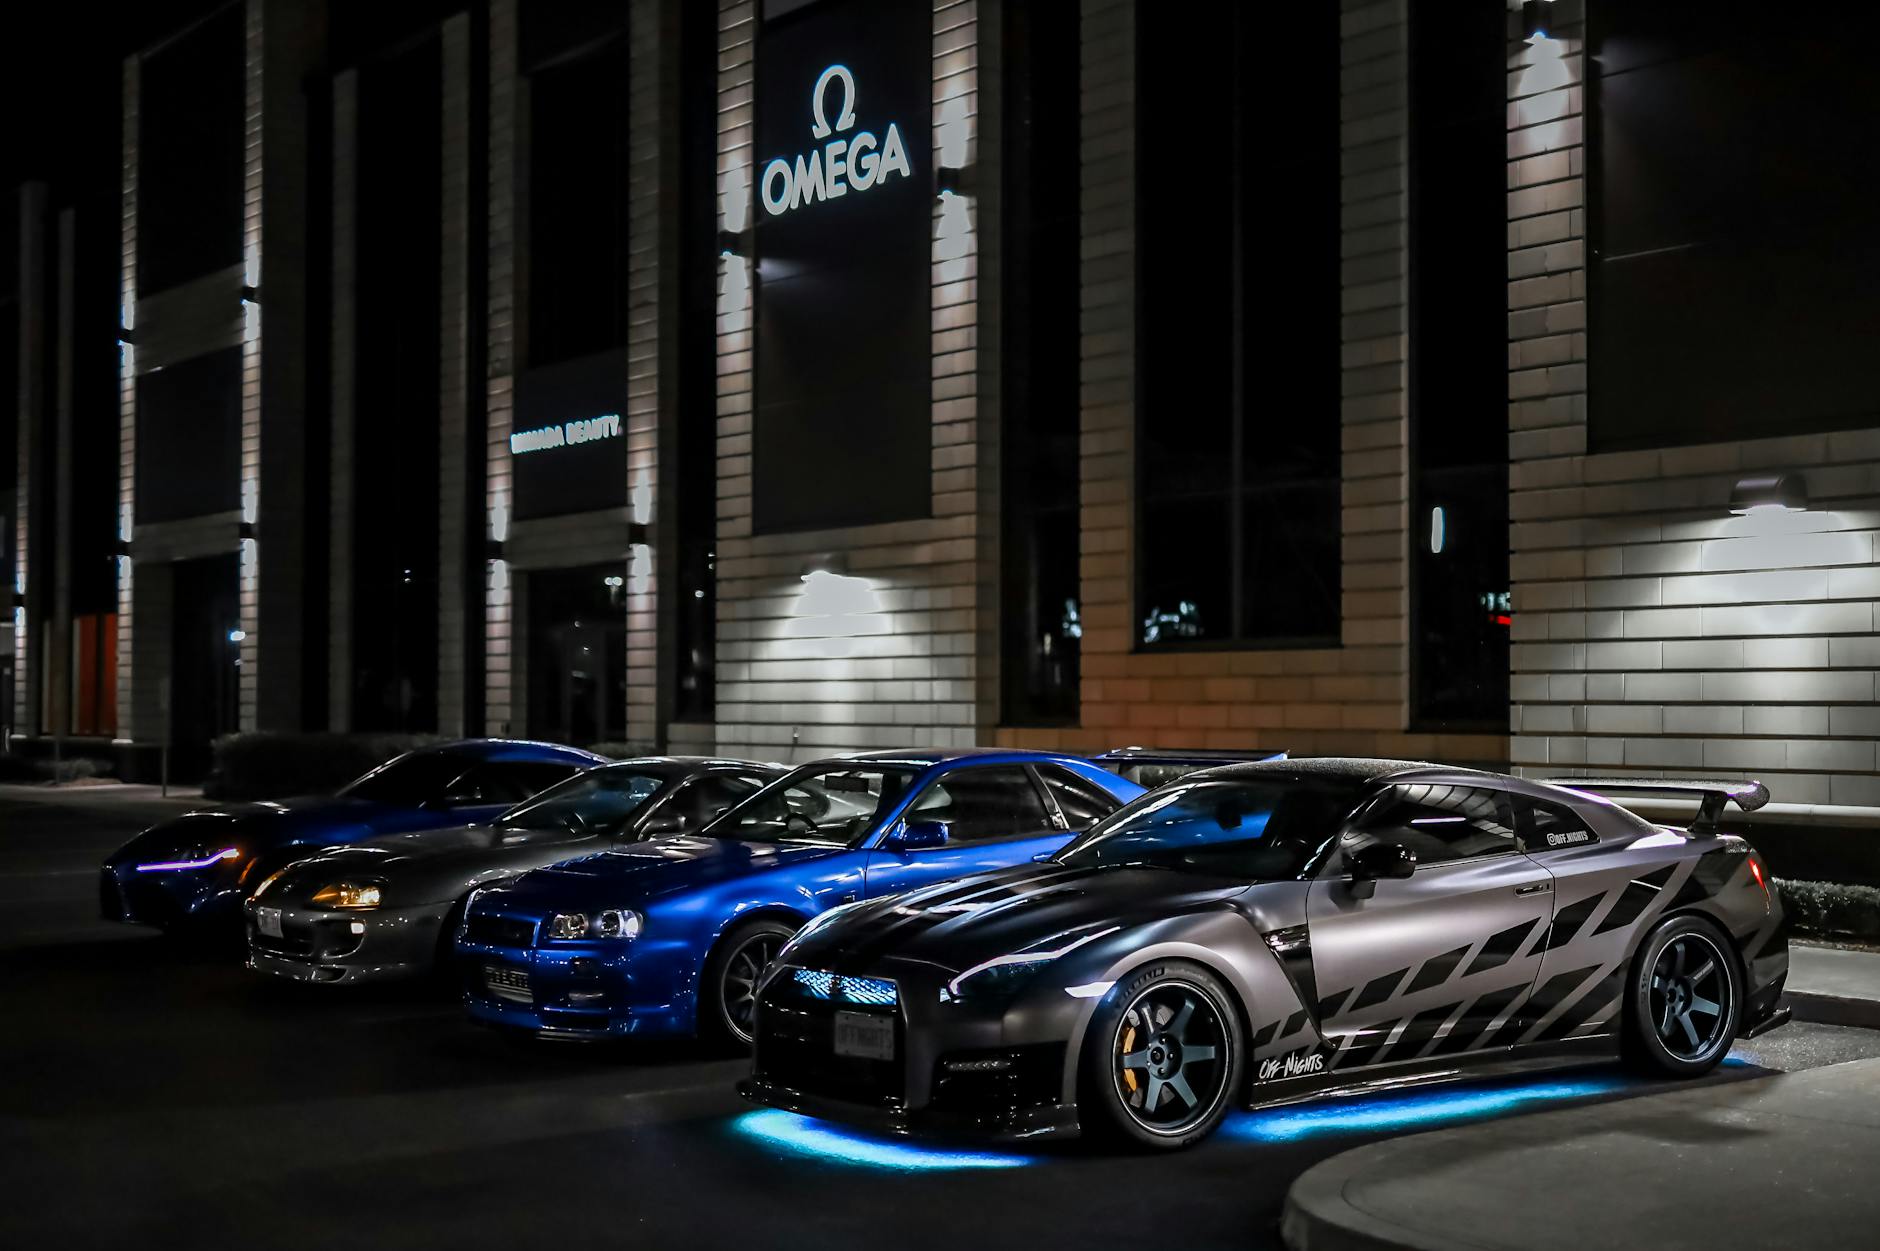 japanese sports cars on the parking lot at night